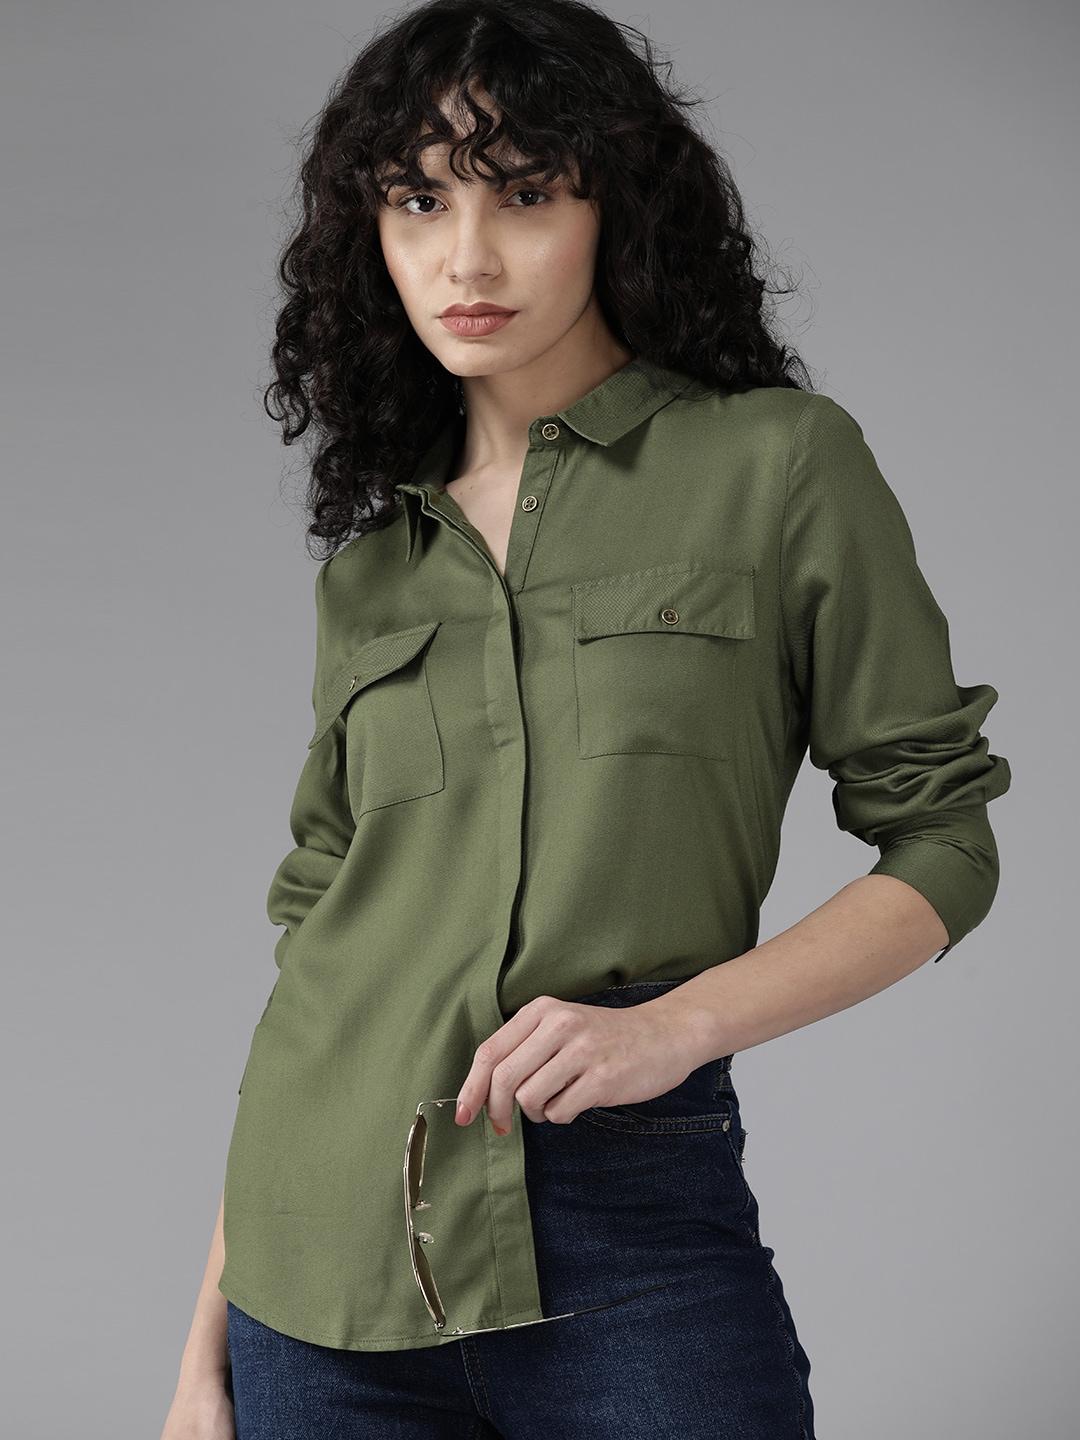 the roadster lifestyle co. women olive green solid regular fit shirt